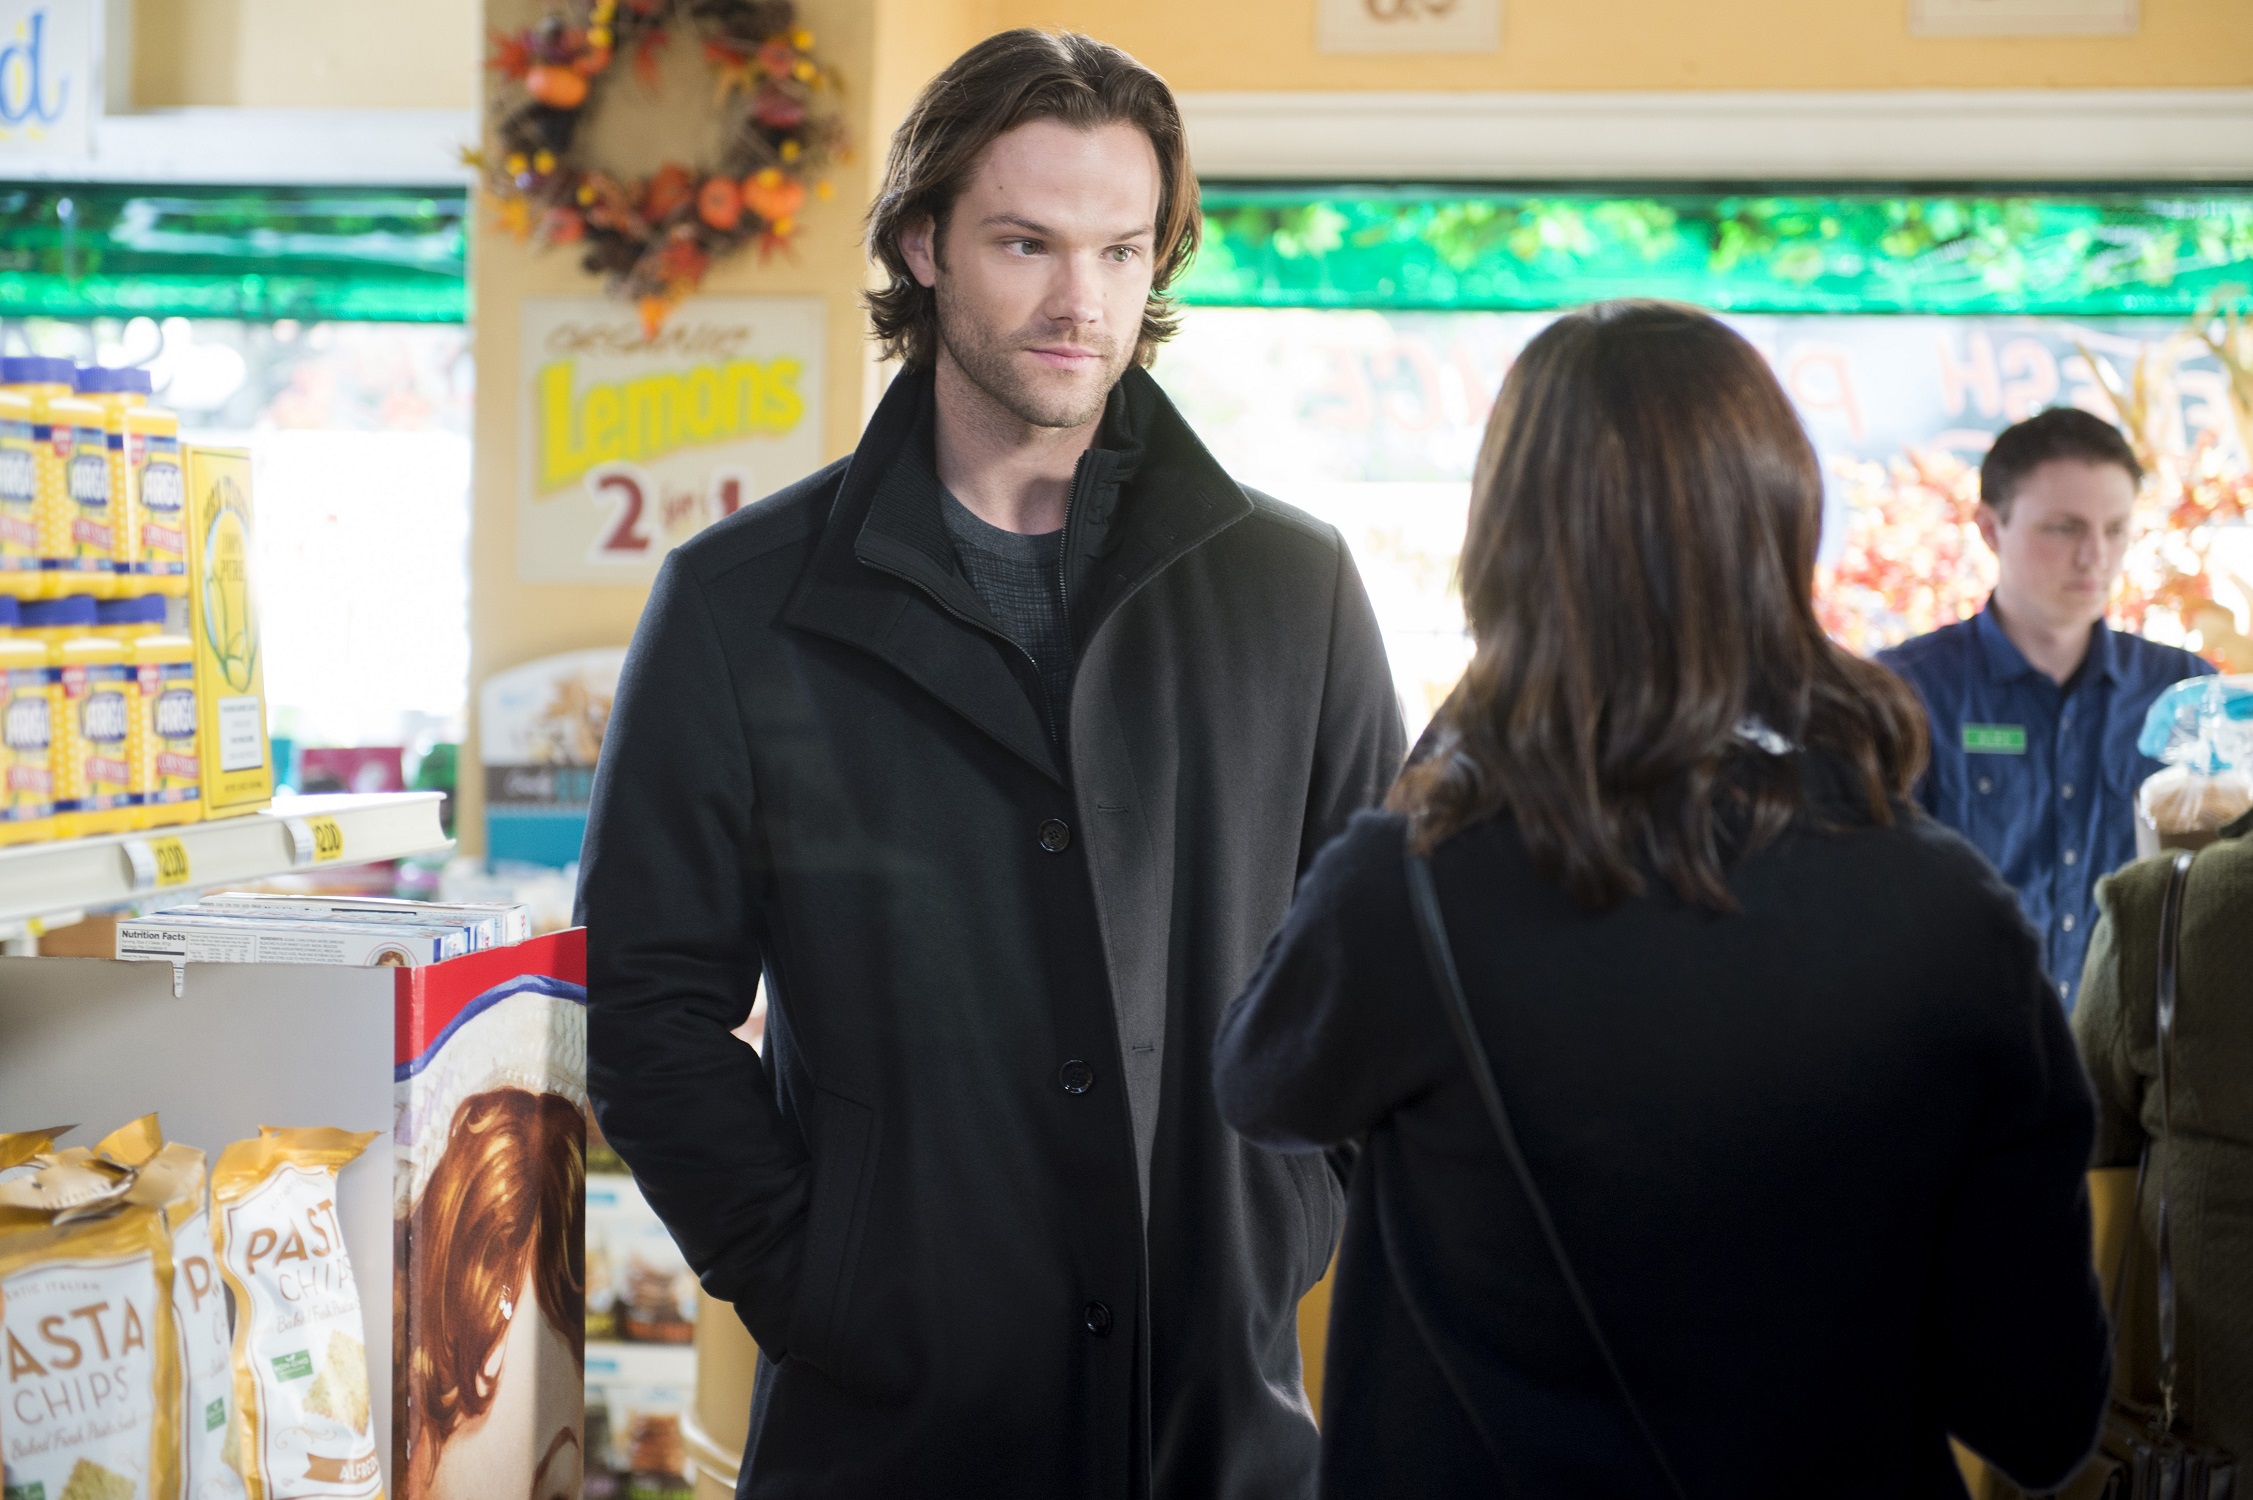 Jared Padalecki as Dean Forrester and Alexis Bledel as Rory Gilmore in 'Gilmore Girls: A Year in the Life'